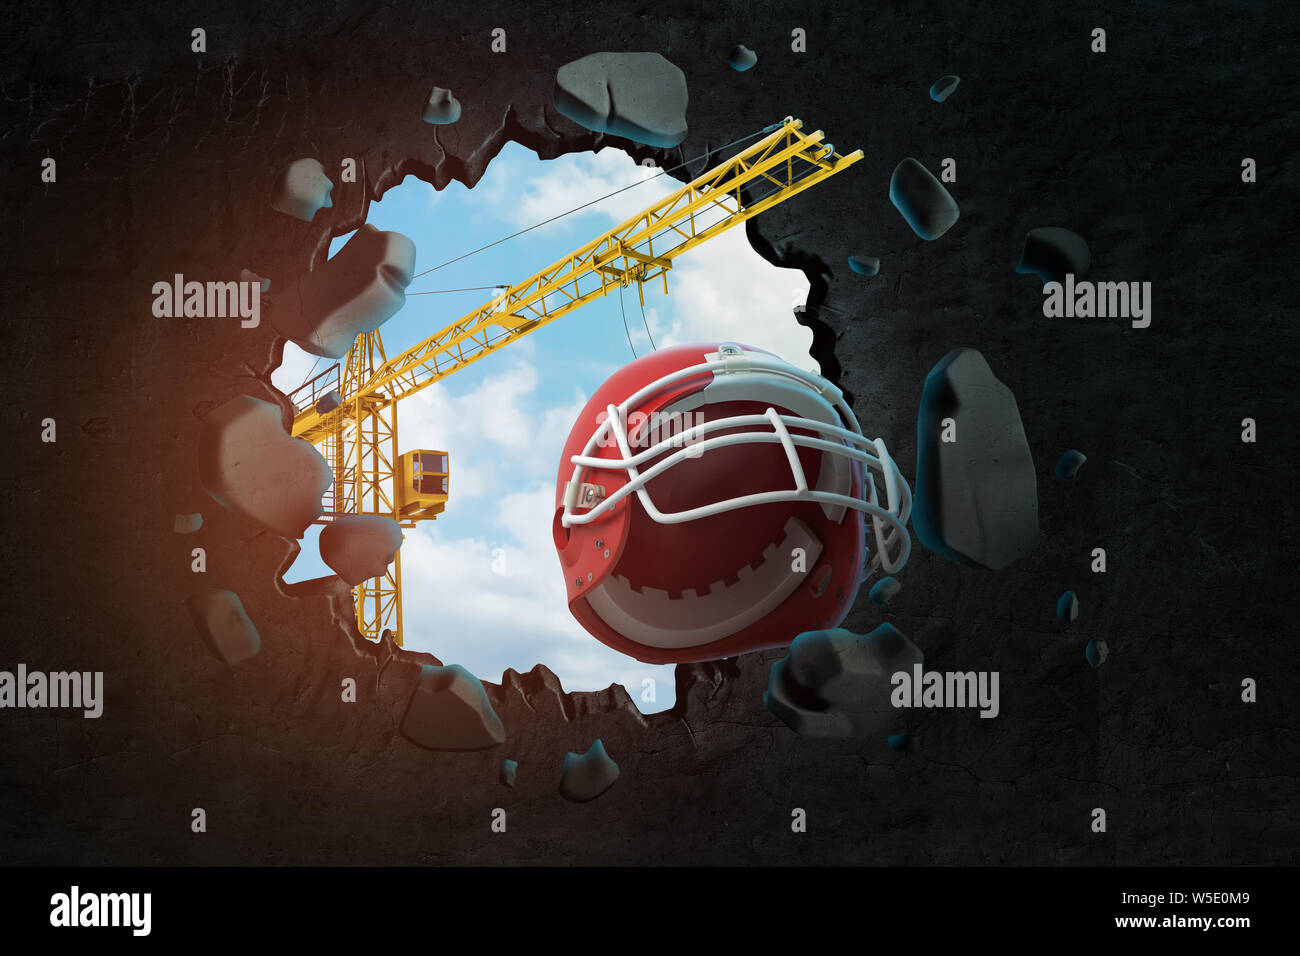 3d rendering of hoisting crane carrying helmet for American football and breaking hole in black wall with blue sky seen through. Stock Photo